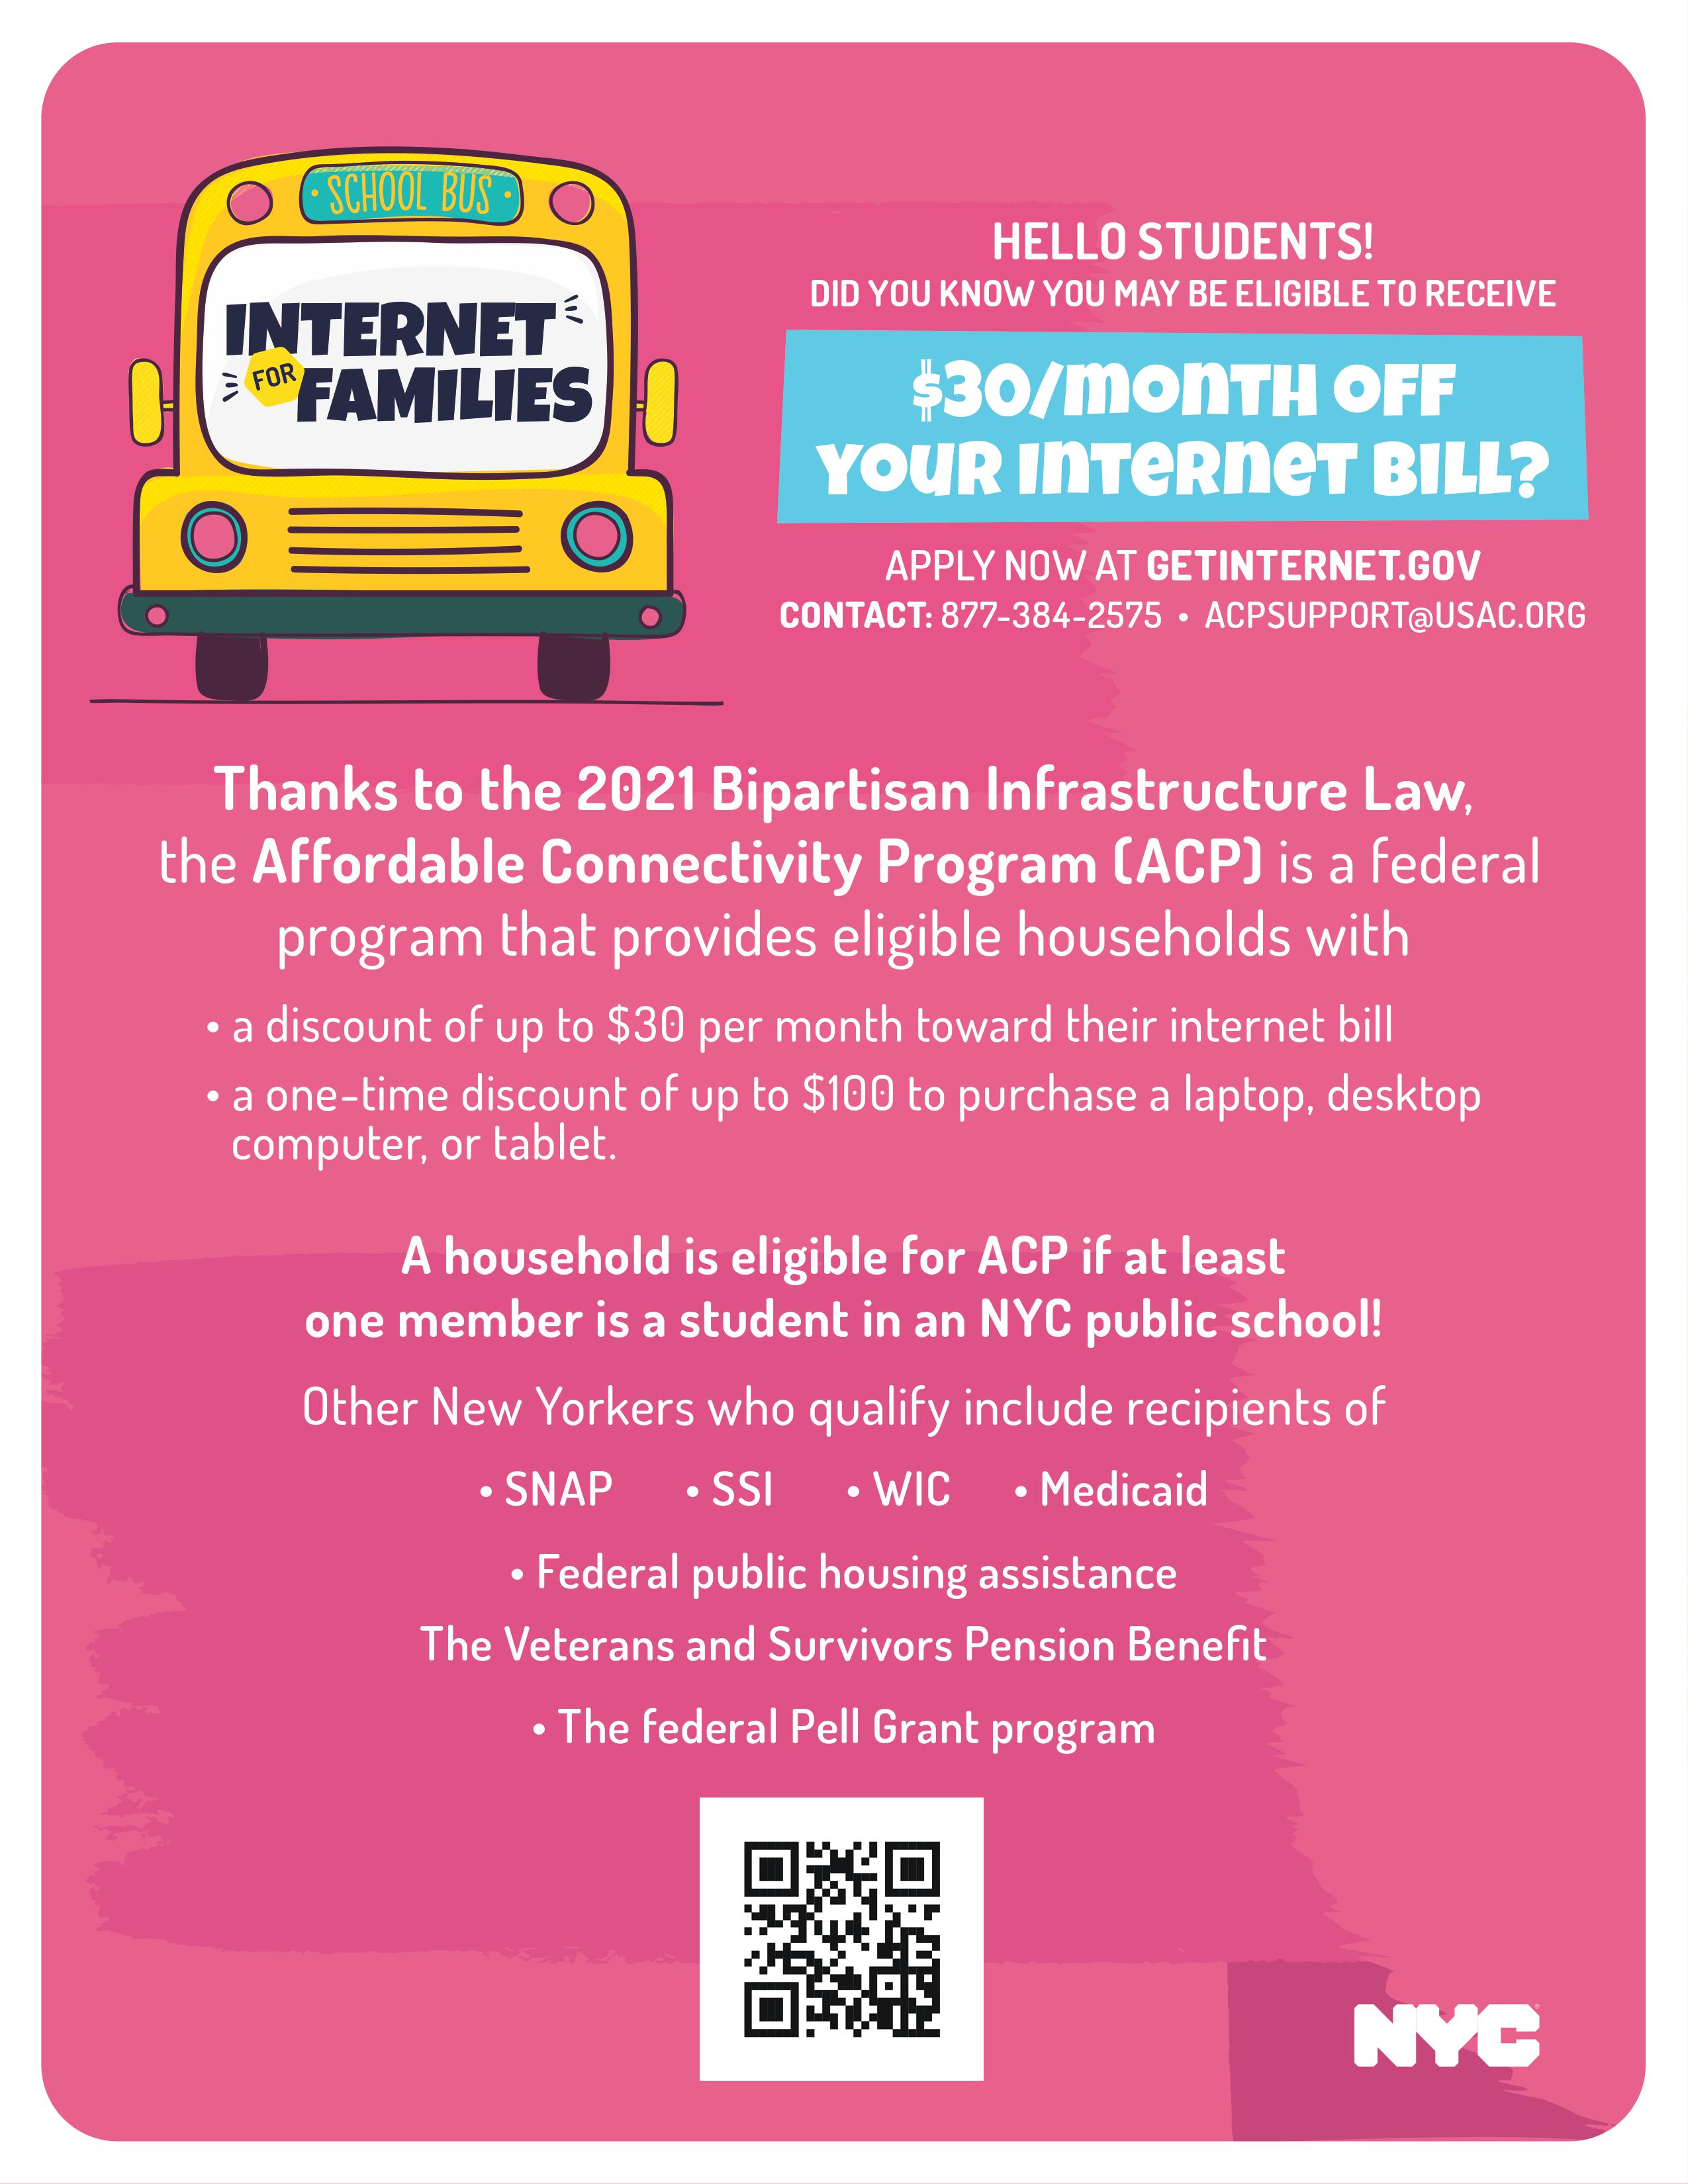 Flyer promoting internet for families with the Affordable Connectivity Program. A household is eligible for ACP if at least one member is a student in an NYC public school! Other New Yorkers who qualify are recipients of SNAP, SSI, WIC, Medicaid, Federal public housing assistance, The Veterans and Survivors Pension Benefit, and the federal Pell Grant program